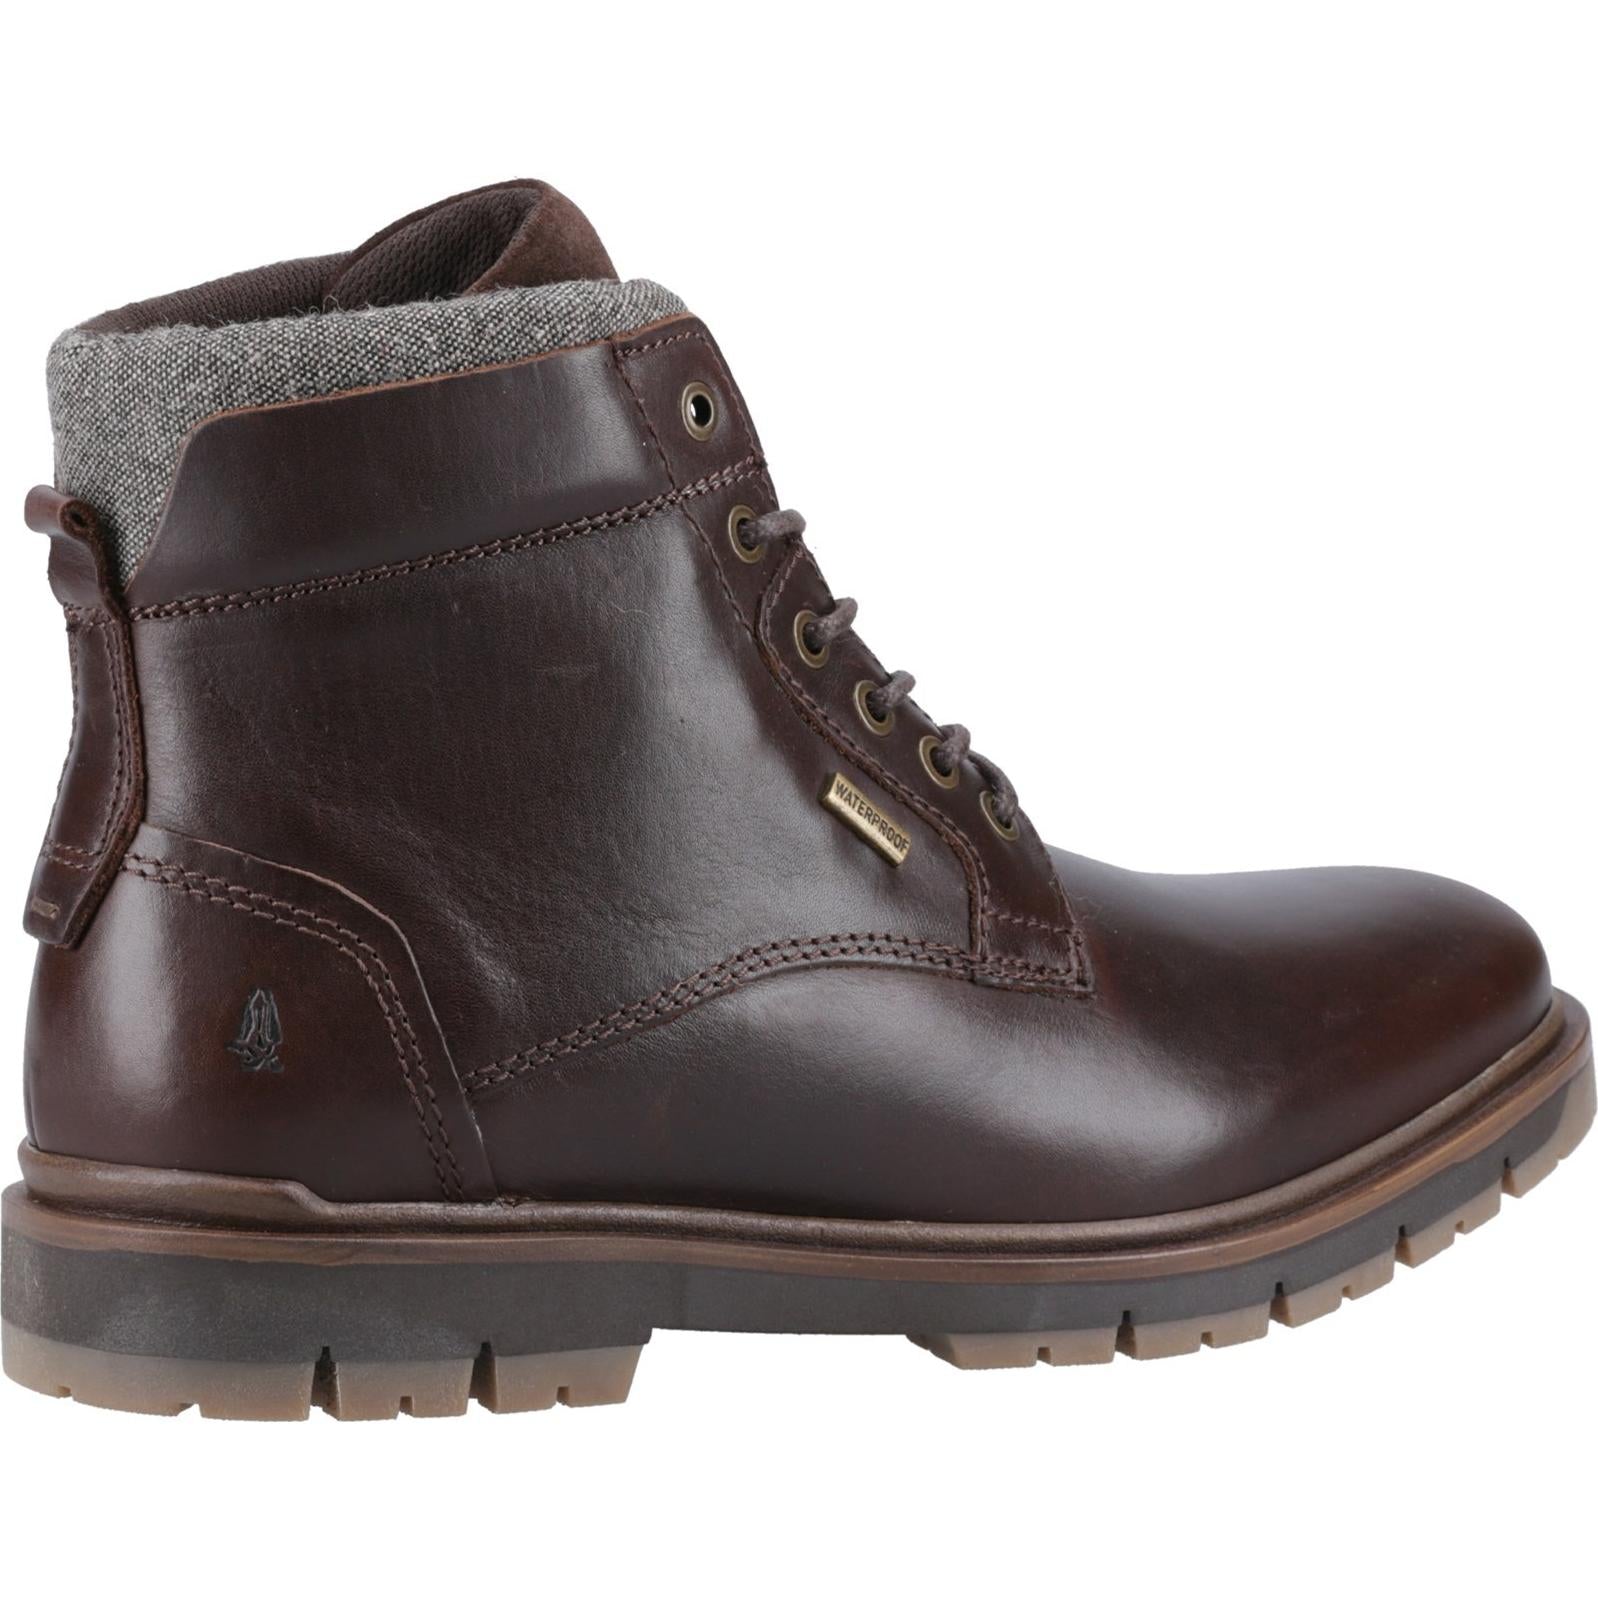 Hush Puppies Peter Boots